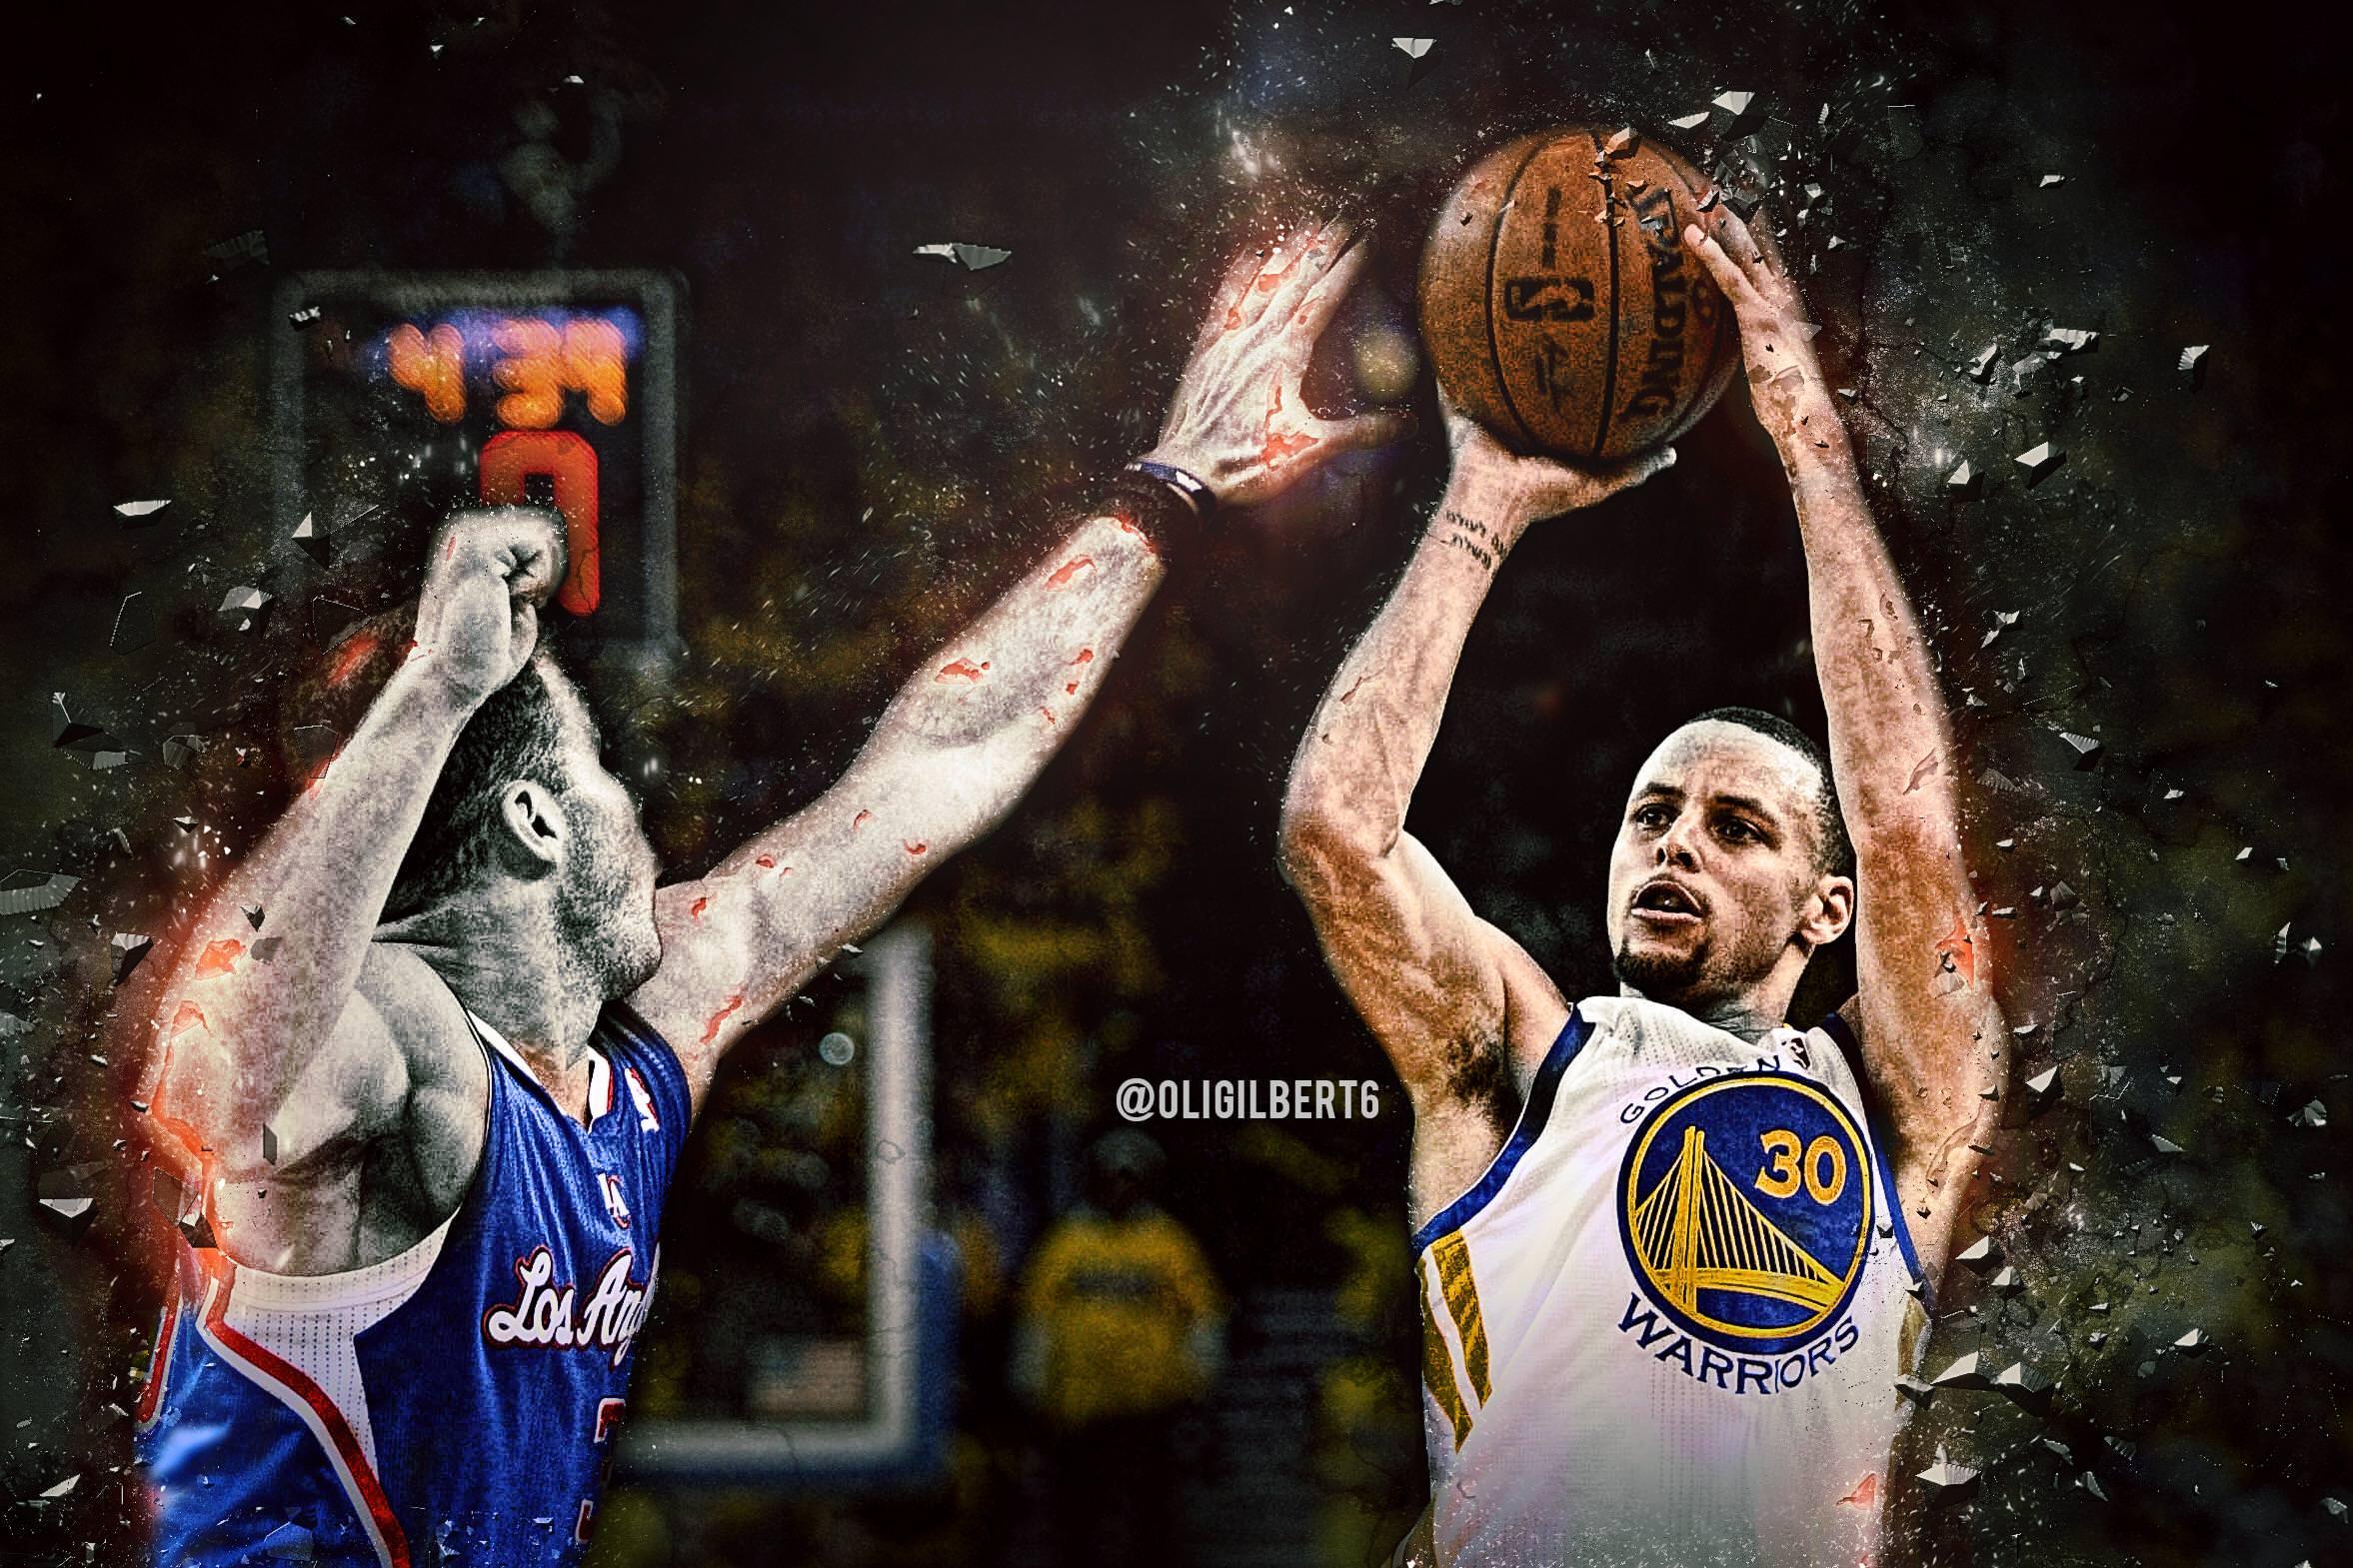 Latest Stephen Curry Wallpaper 2018 For Desktop, iPhone & Mobile